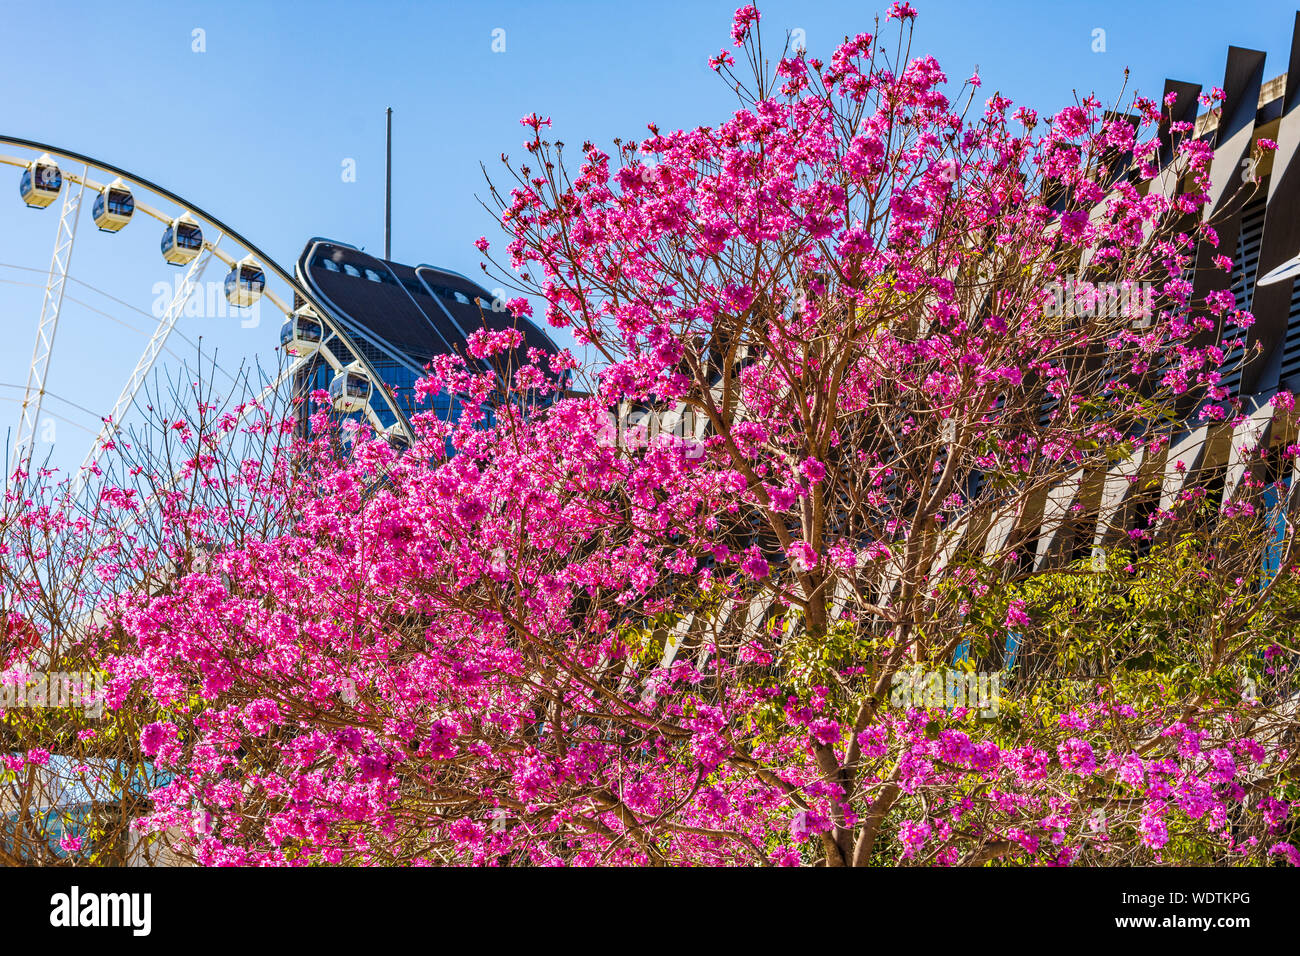 The Pink Flowers of the Blooming Trumpet Tree with City Buildings in the Background. Stock Photo